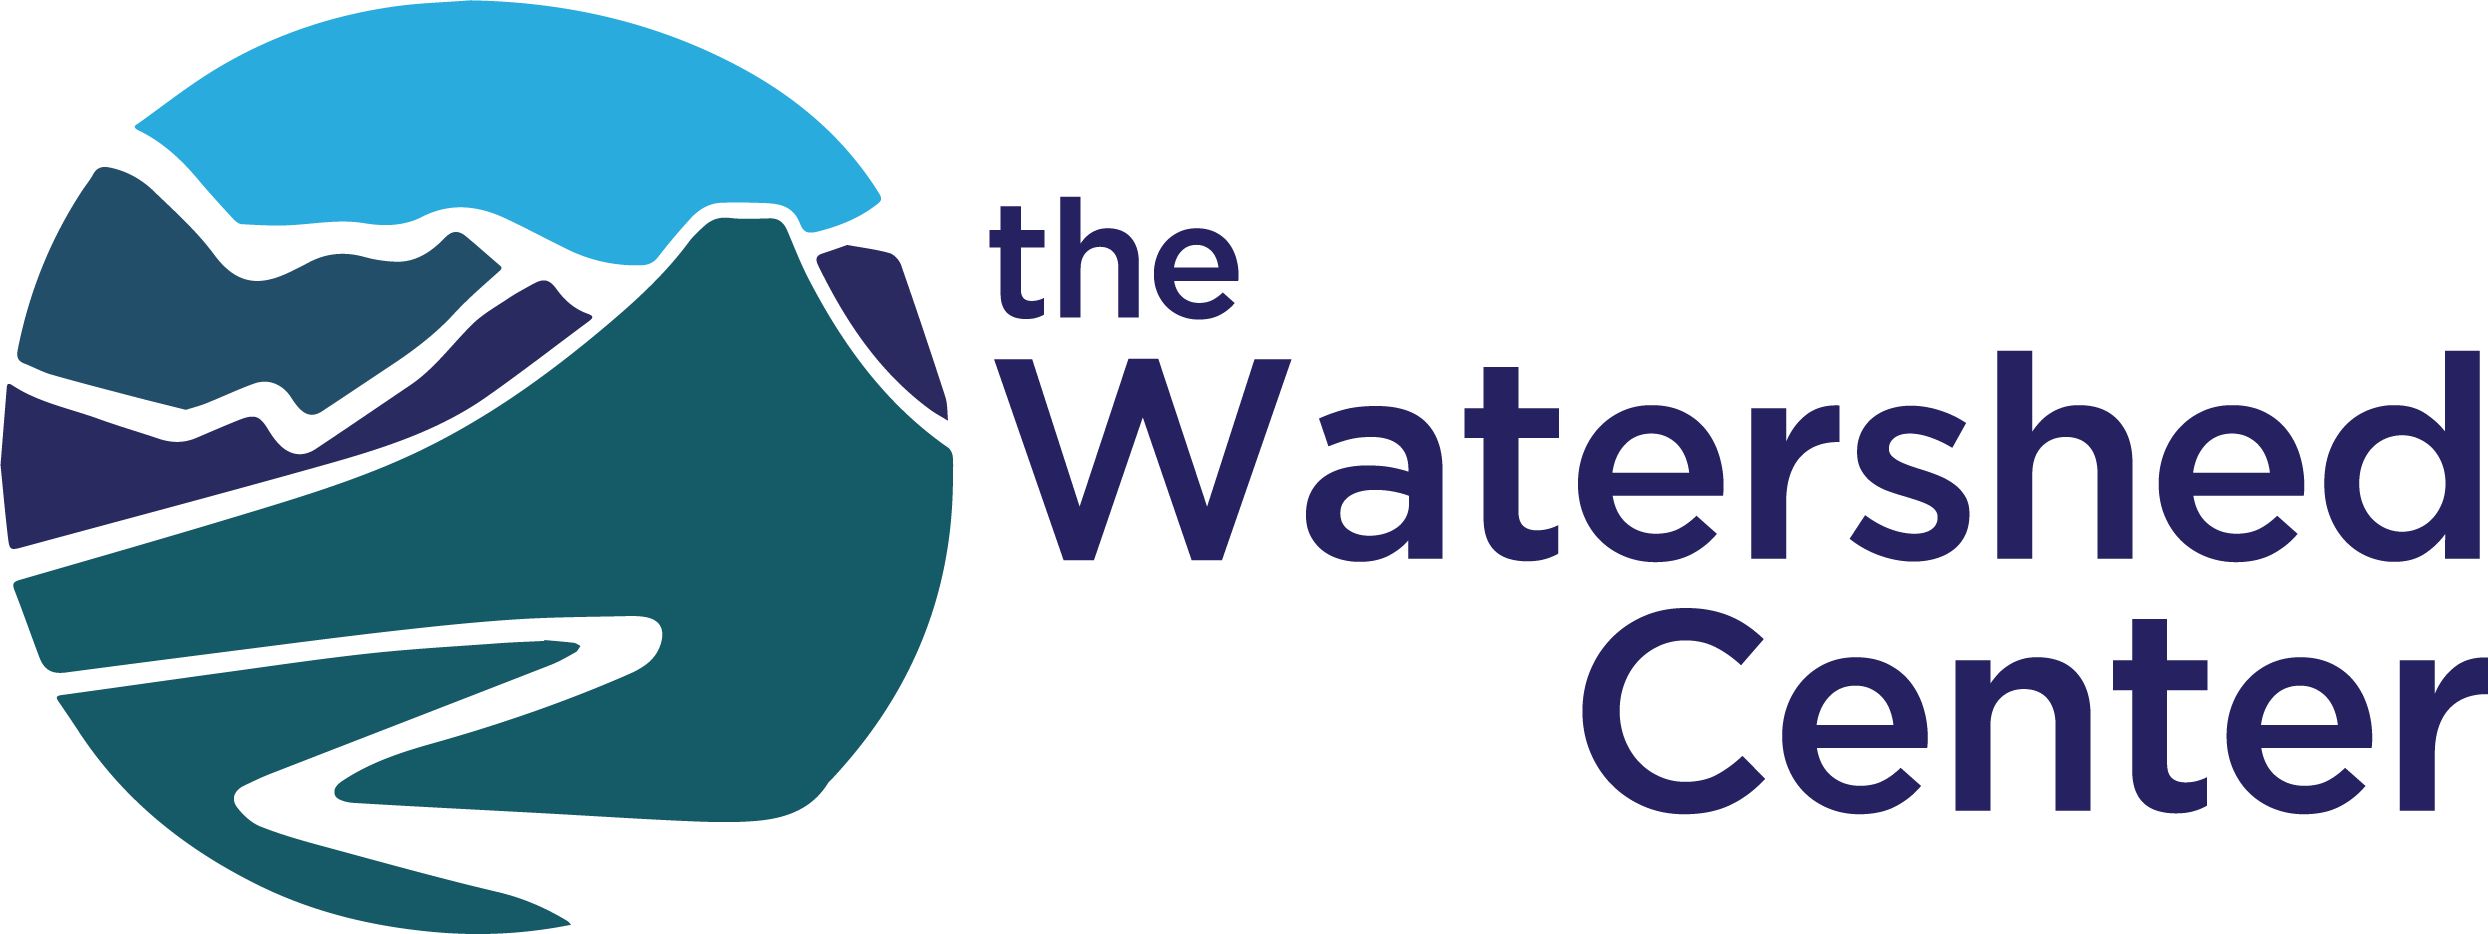 Organization logo of The Watershed Center